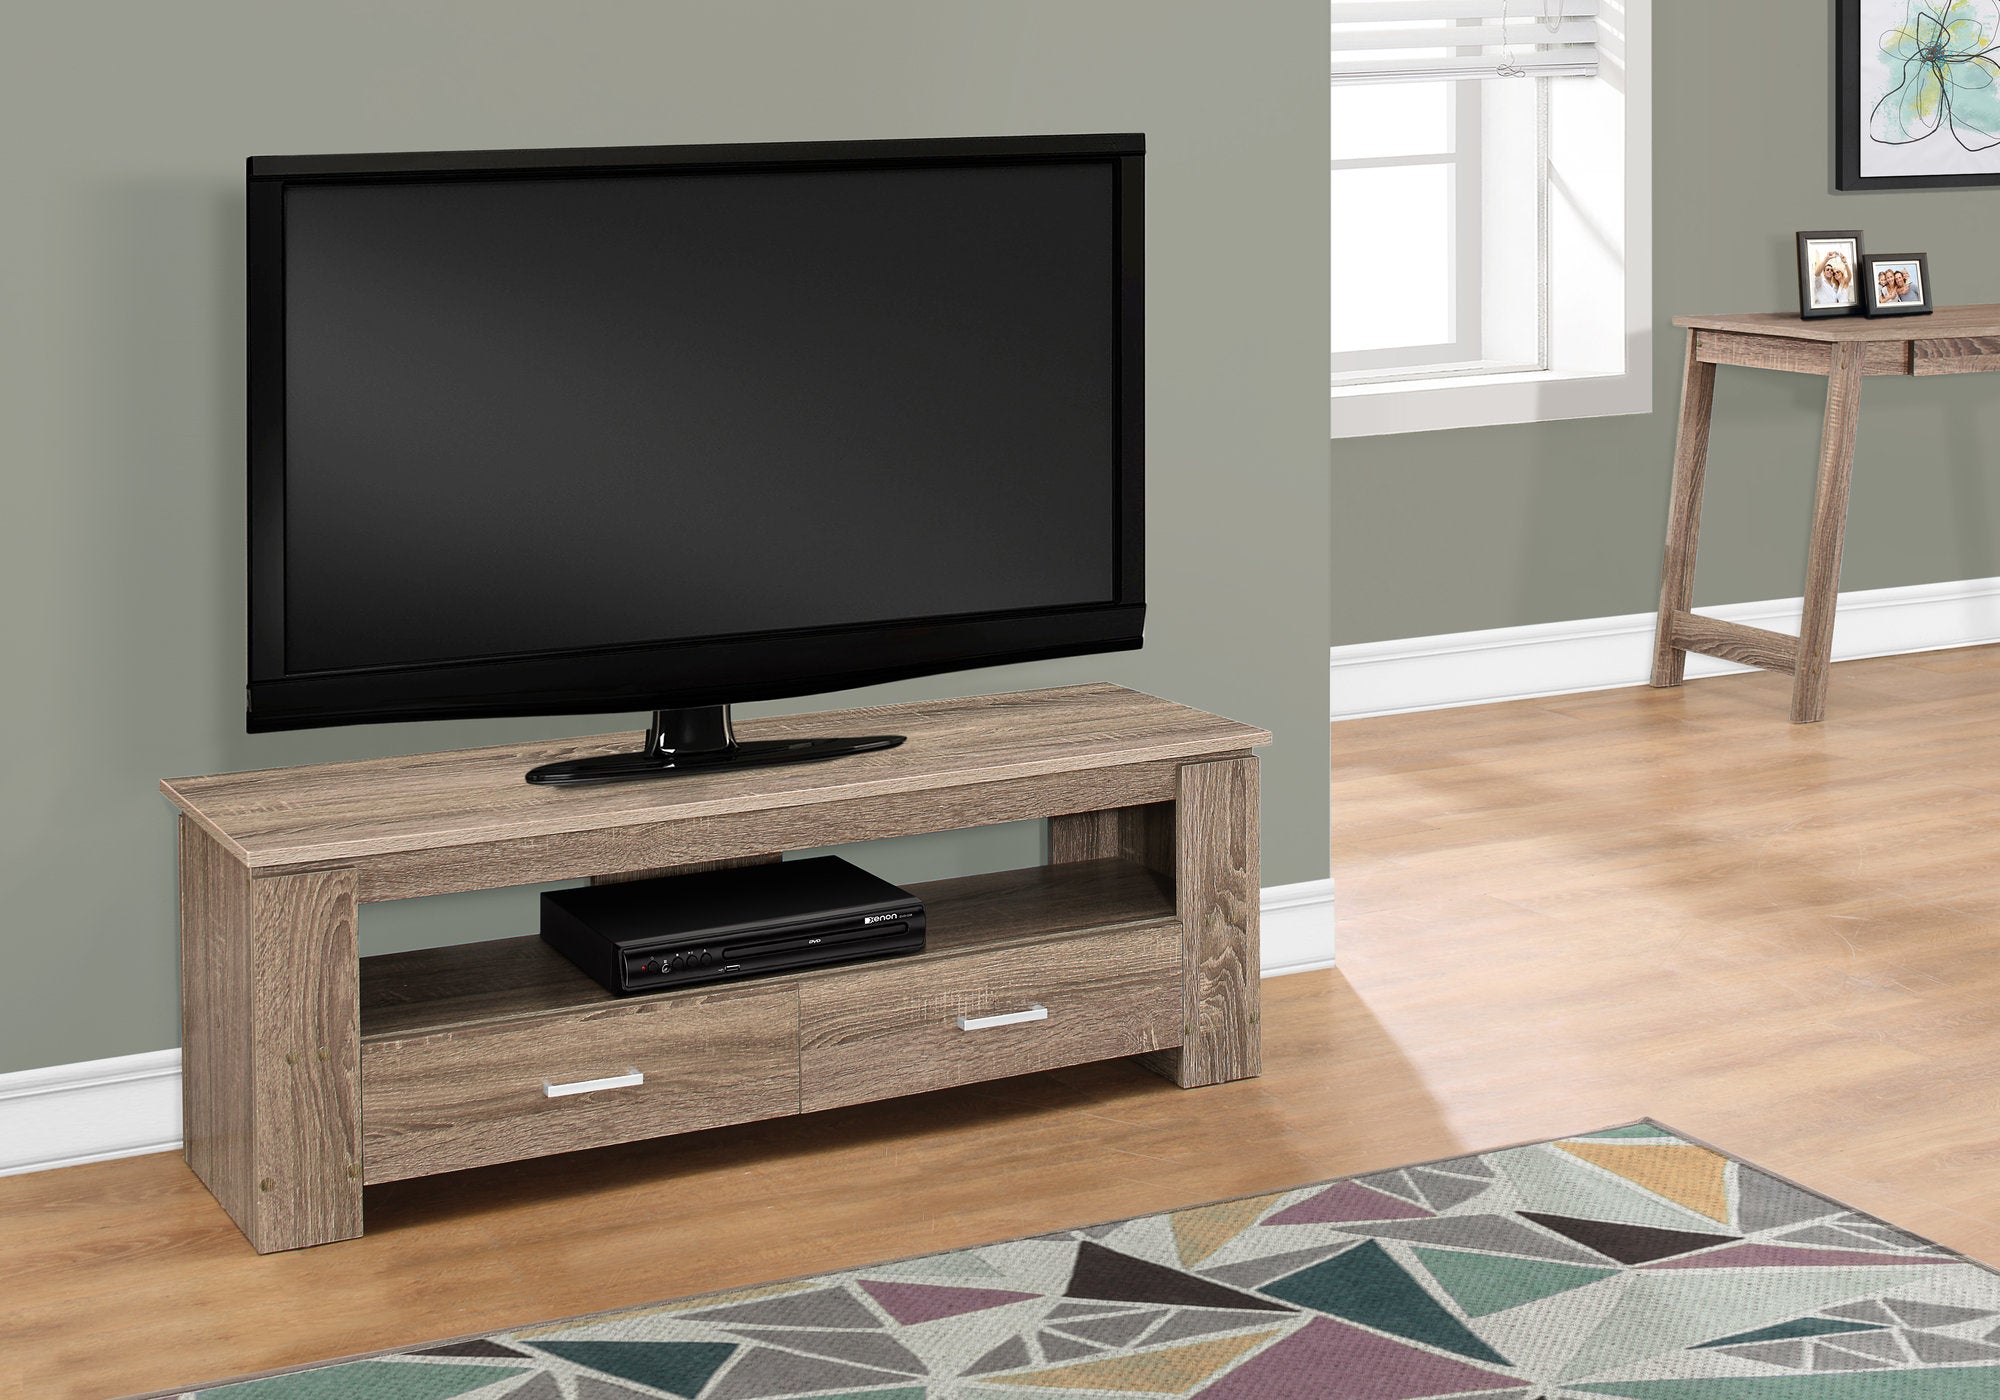 16.25" Dark Taupe Particle Board and Laminate TV Stand with 2 Storage Drawers